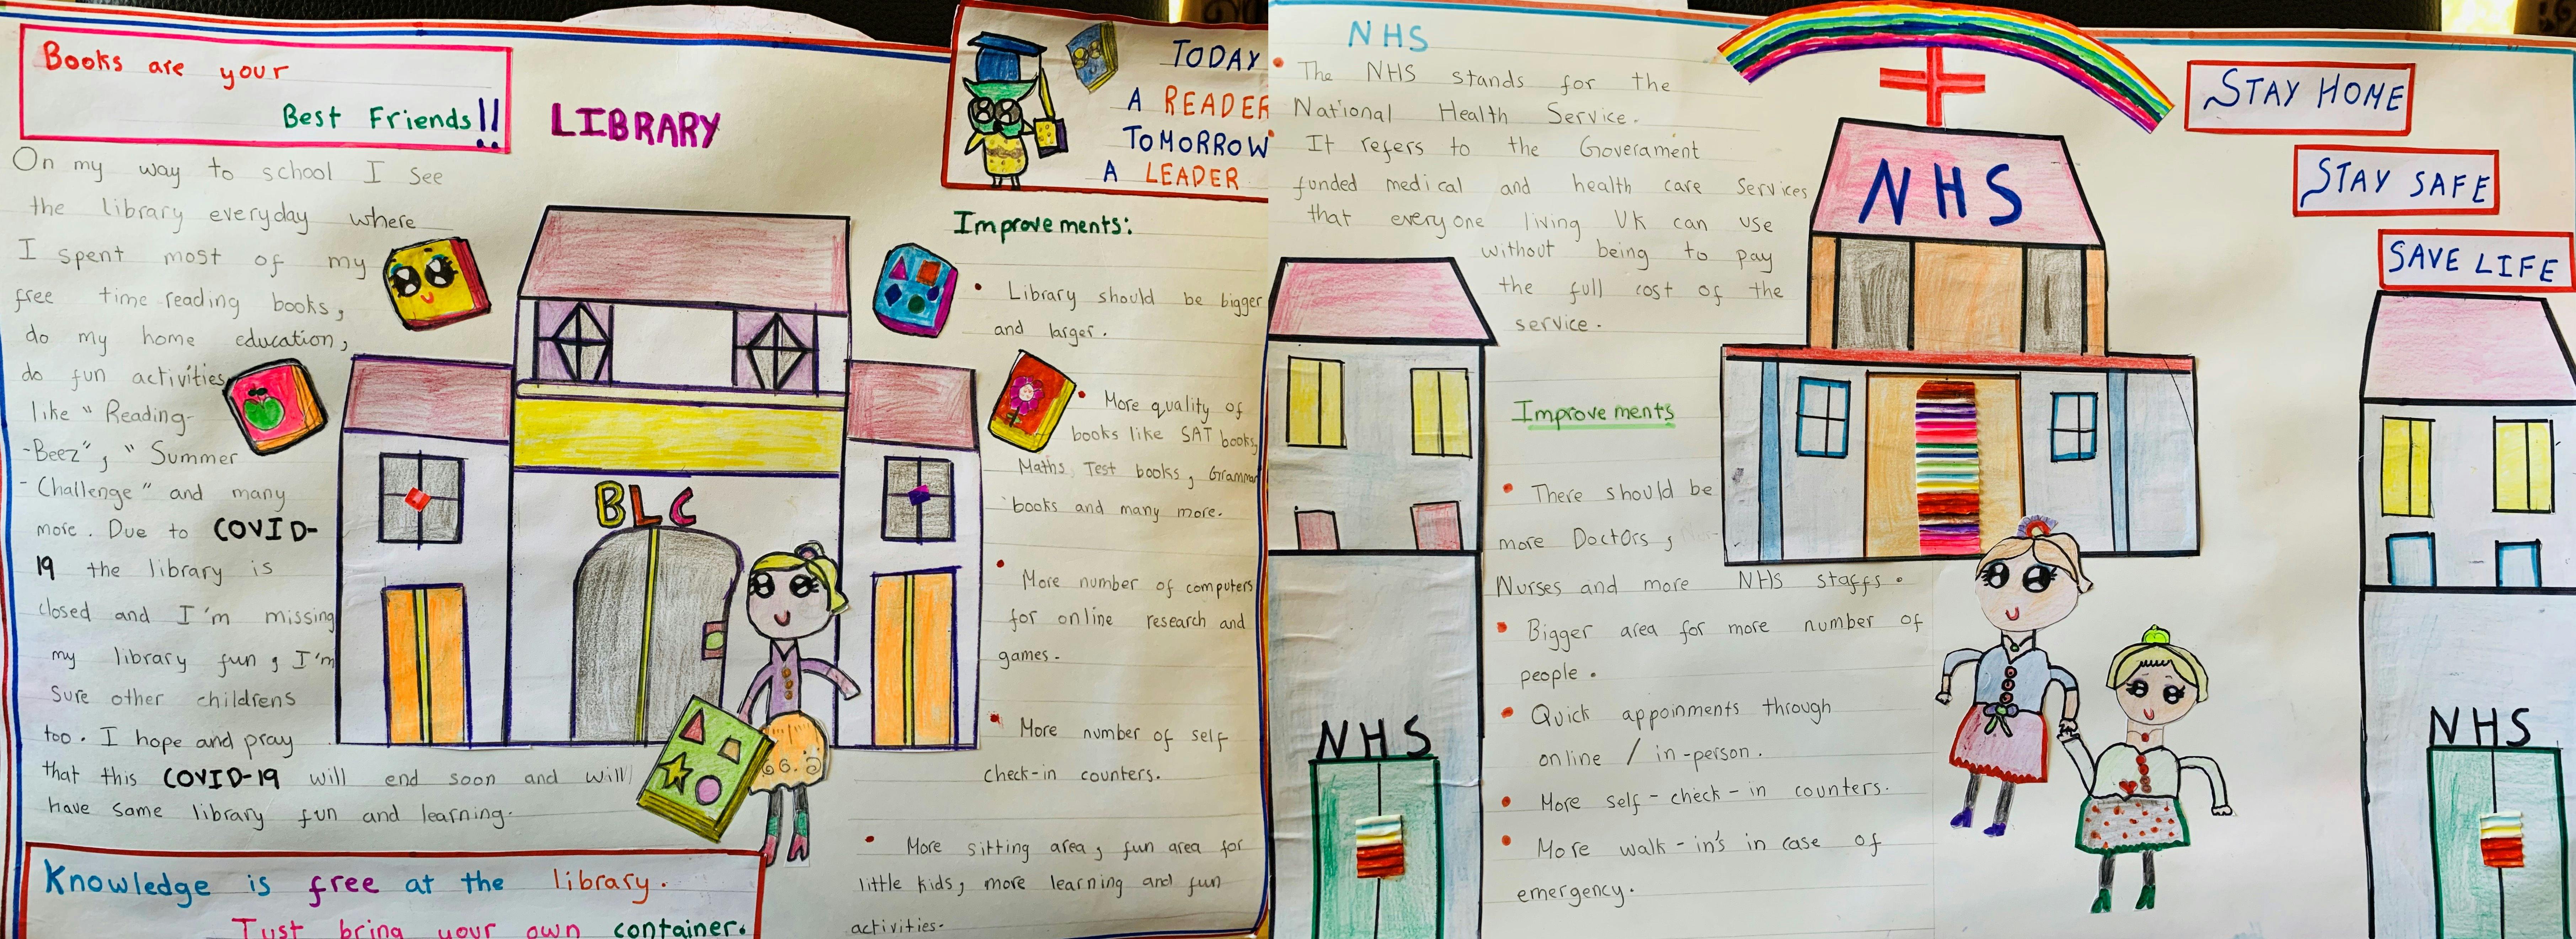 Library and the NHS by Muyassar Afroz